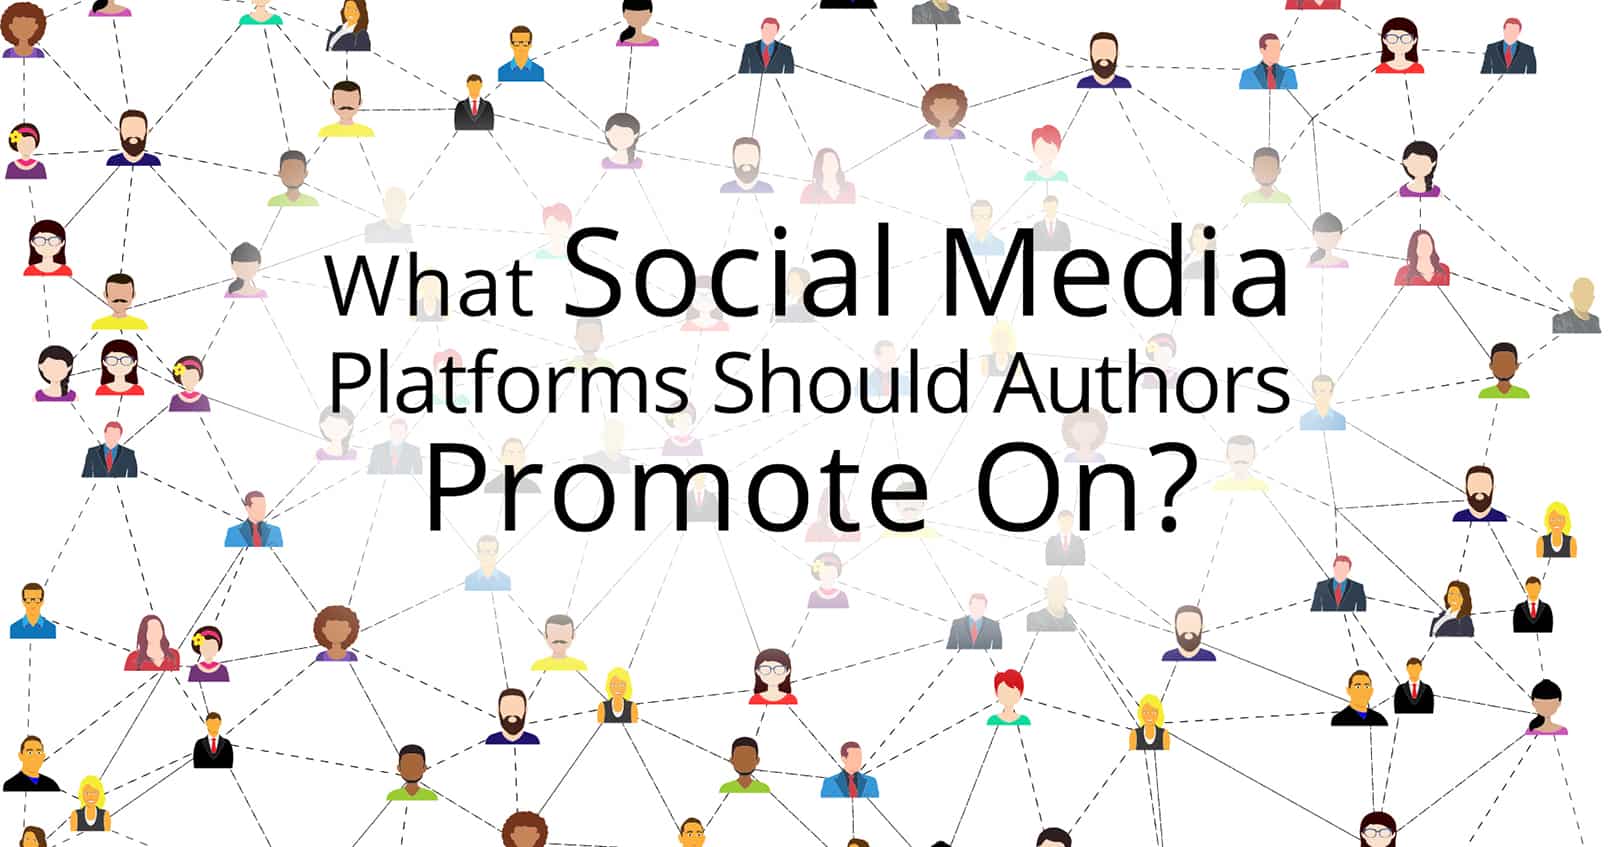 What Social Media Platforms Should Authors Promote On